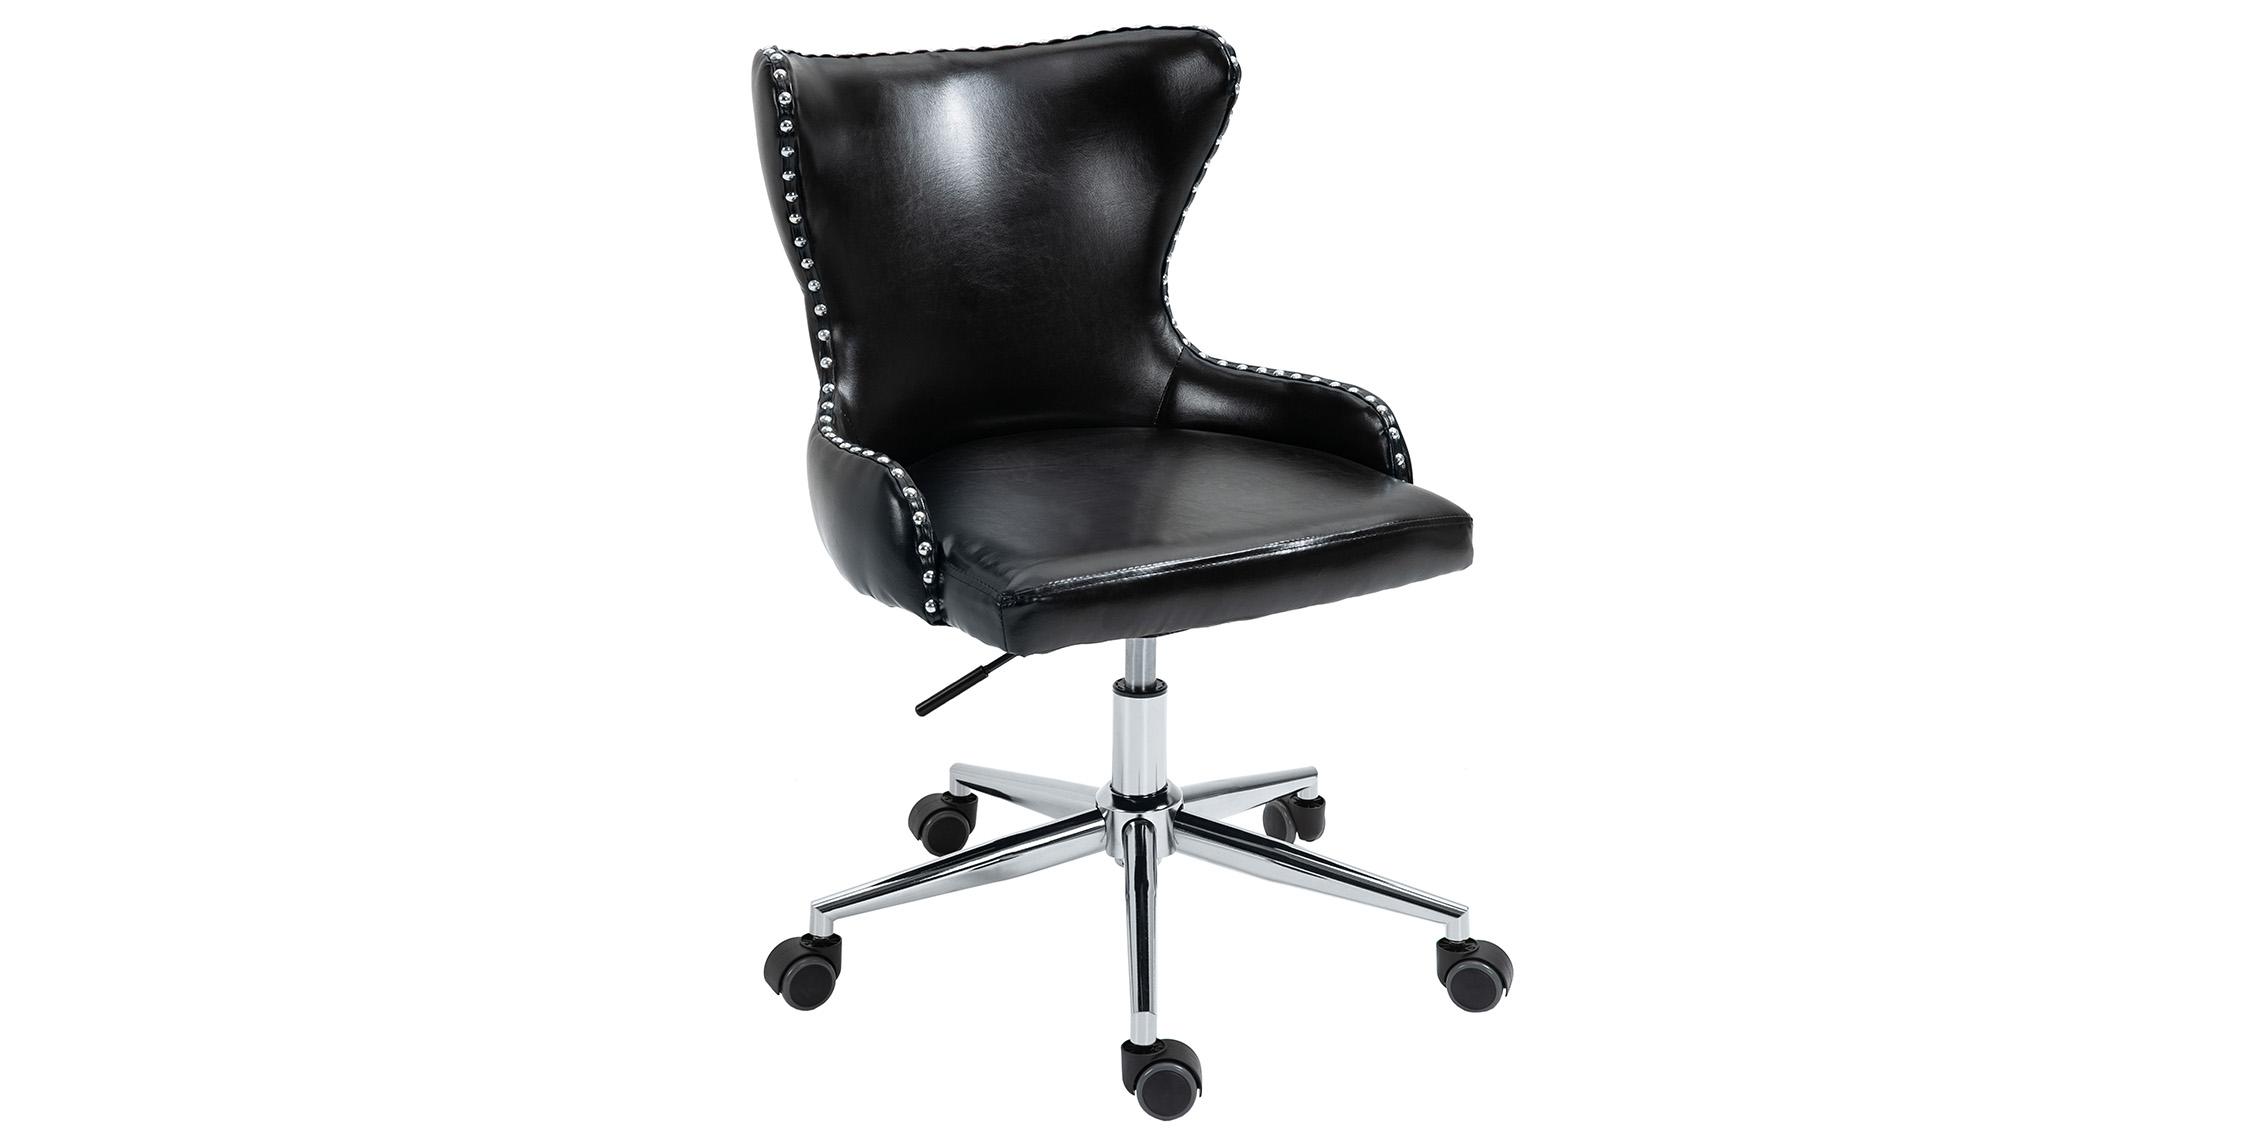 Contemporary, Modern Office Chair HENDRIX 168Black 168Black in Chrome, Black Faux Leather